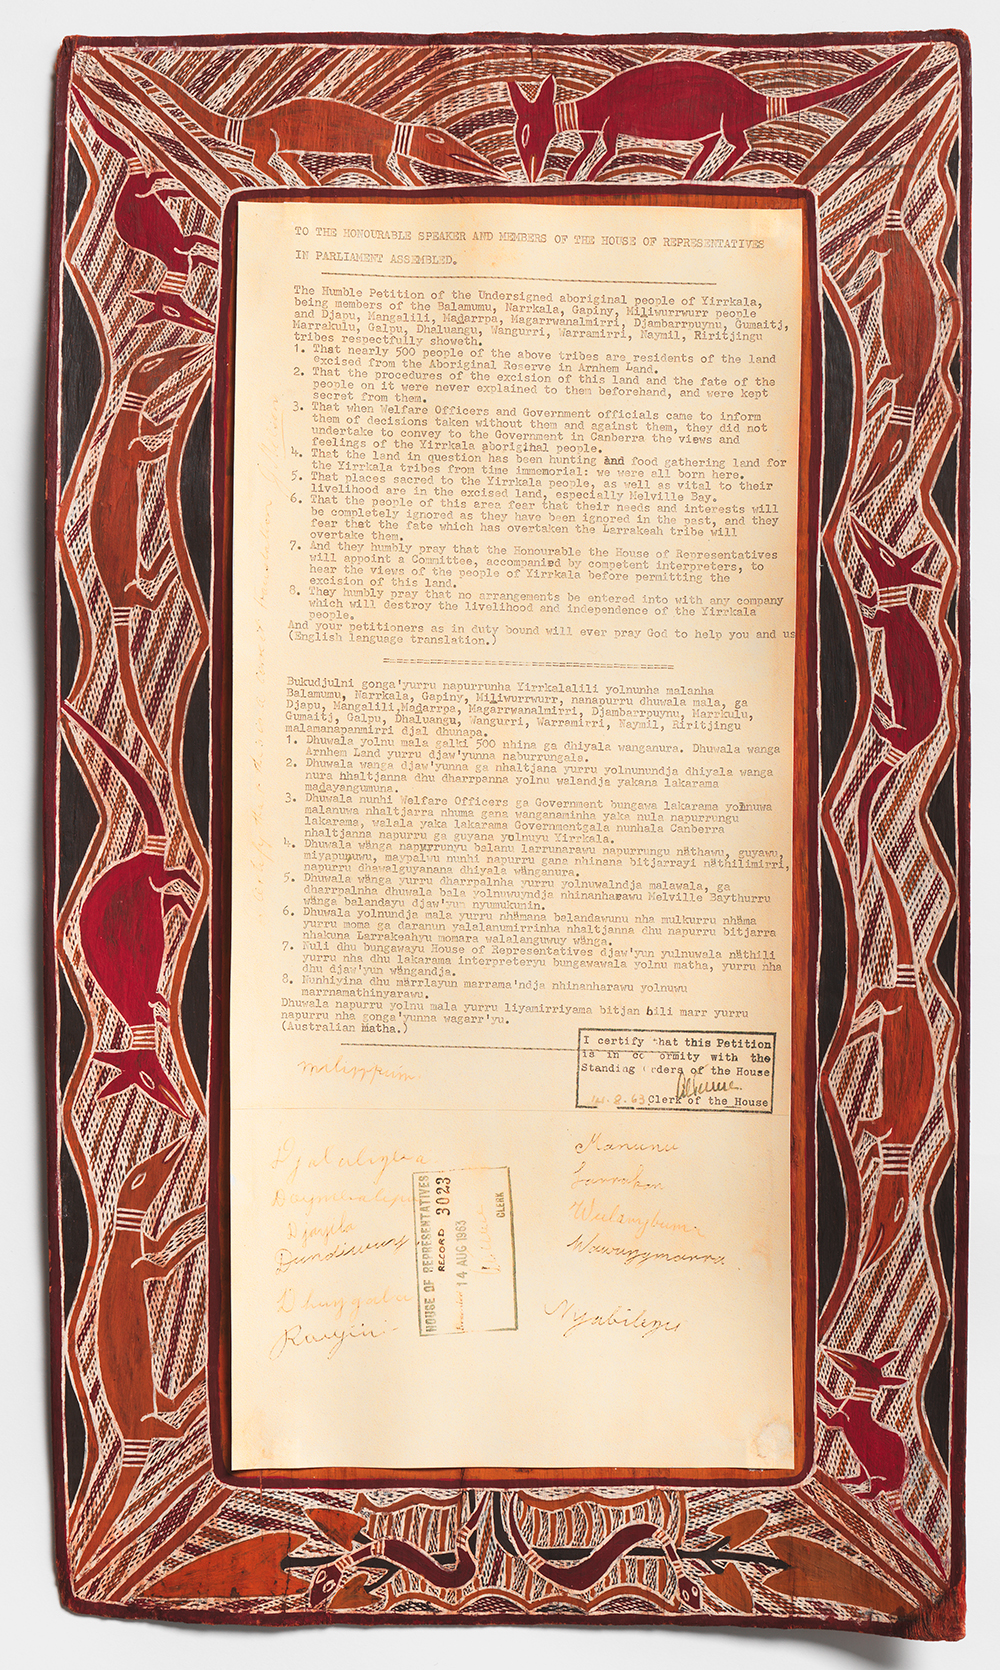 Yirrkala Bark Petition 14.8.1963 (46.9 x 21 cm, natural ochres on bark, ink on paper), by Yirrkala artists, Dhuwa moiety, Parliament House Art Collection